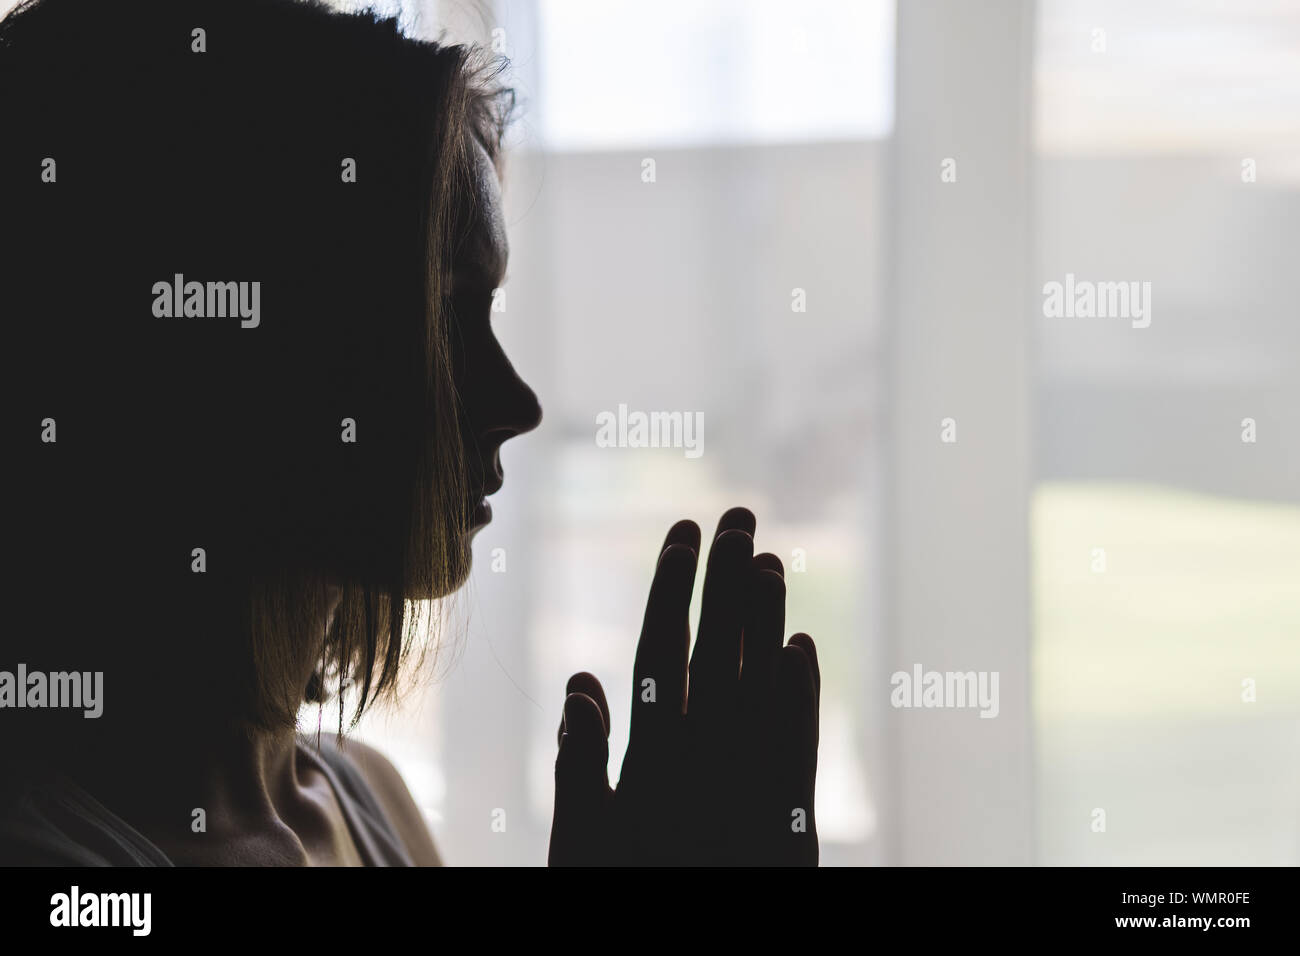 Silhouette of girl at window of clasped hand in gesture of prayer Stock Photo